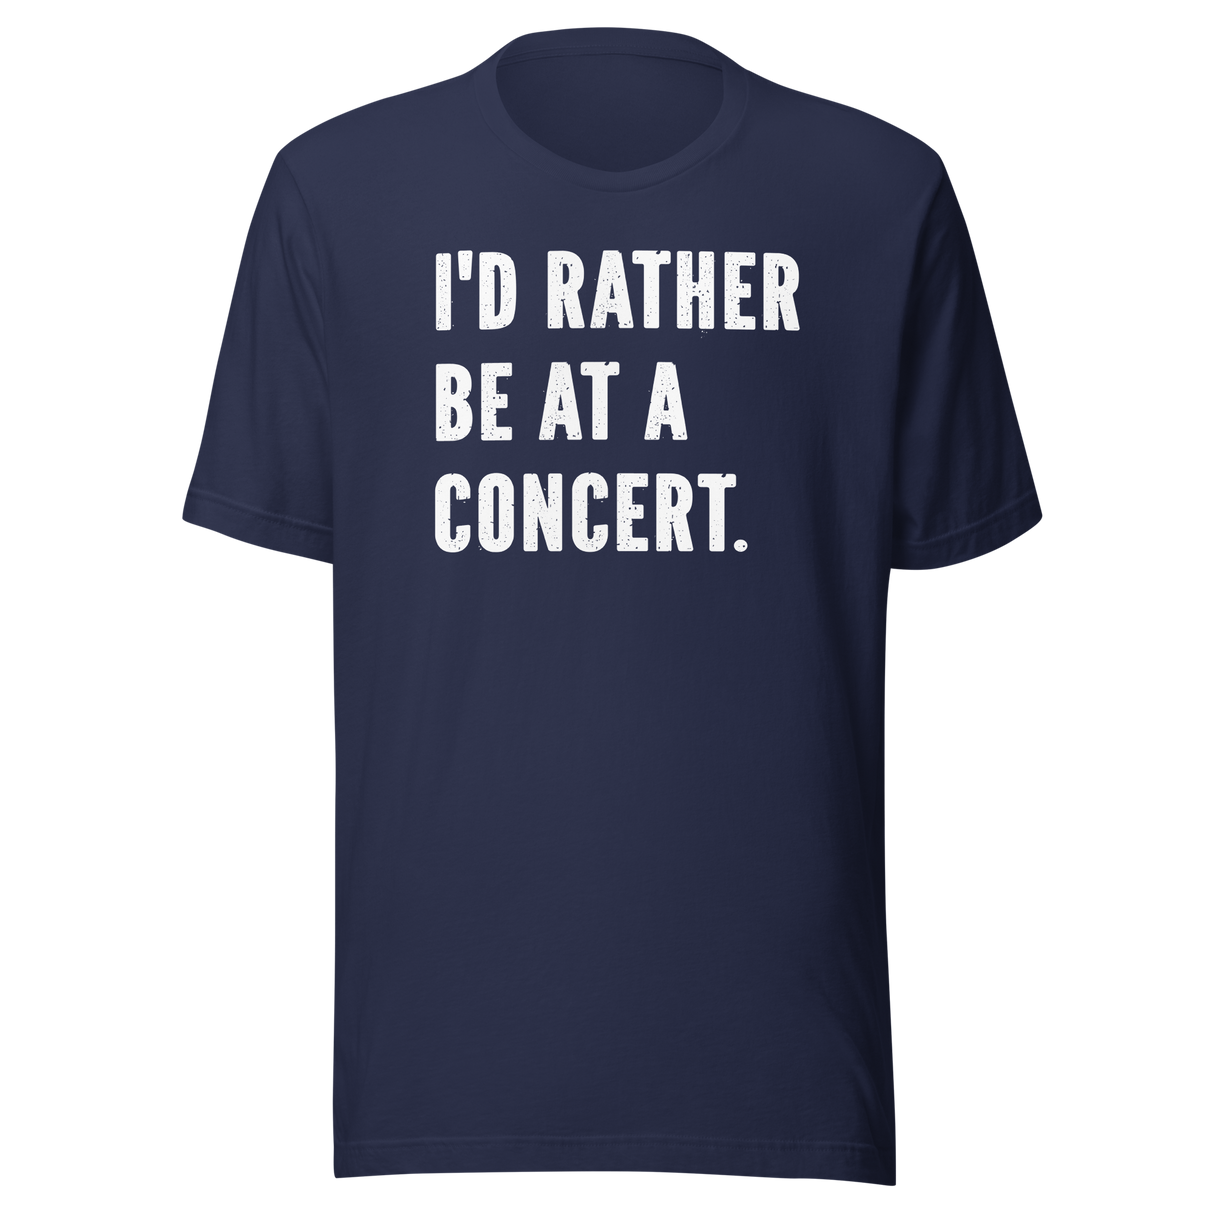 id-rather-be-at-a-concert-life-tee-music-t-shirt-music-tee-passion-t-shirt-crowd-tee#color_navy